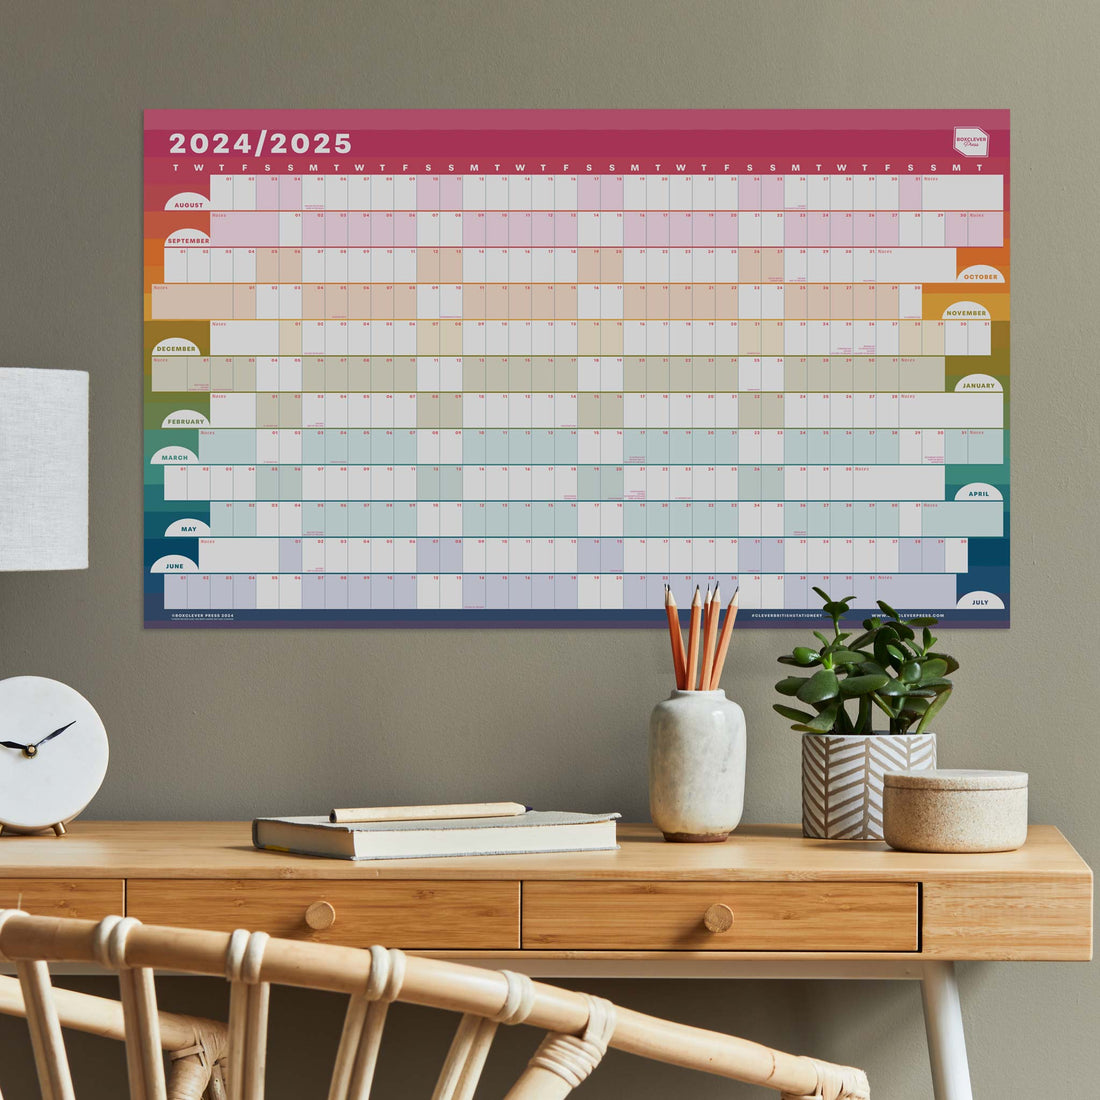 Academic wall planner with rainbow design hung above a wooden table